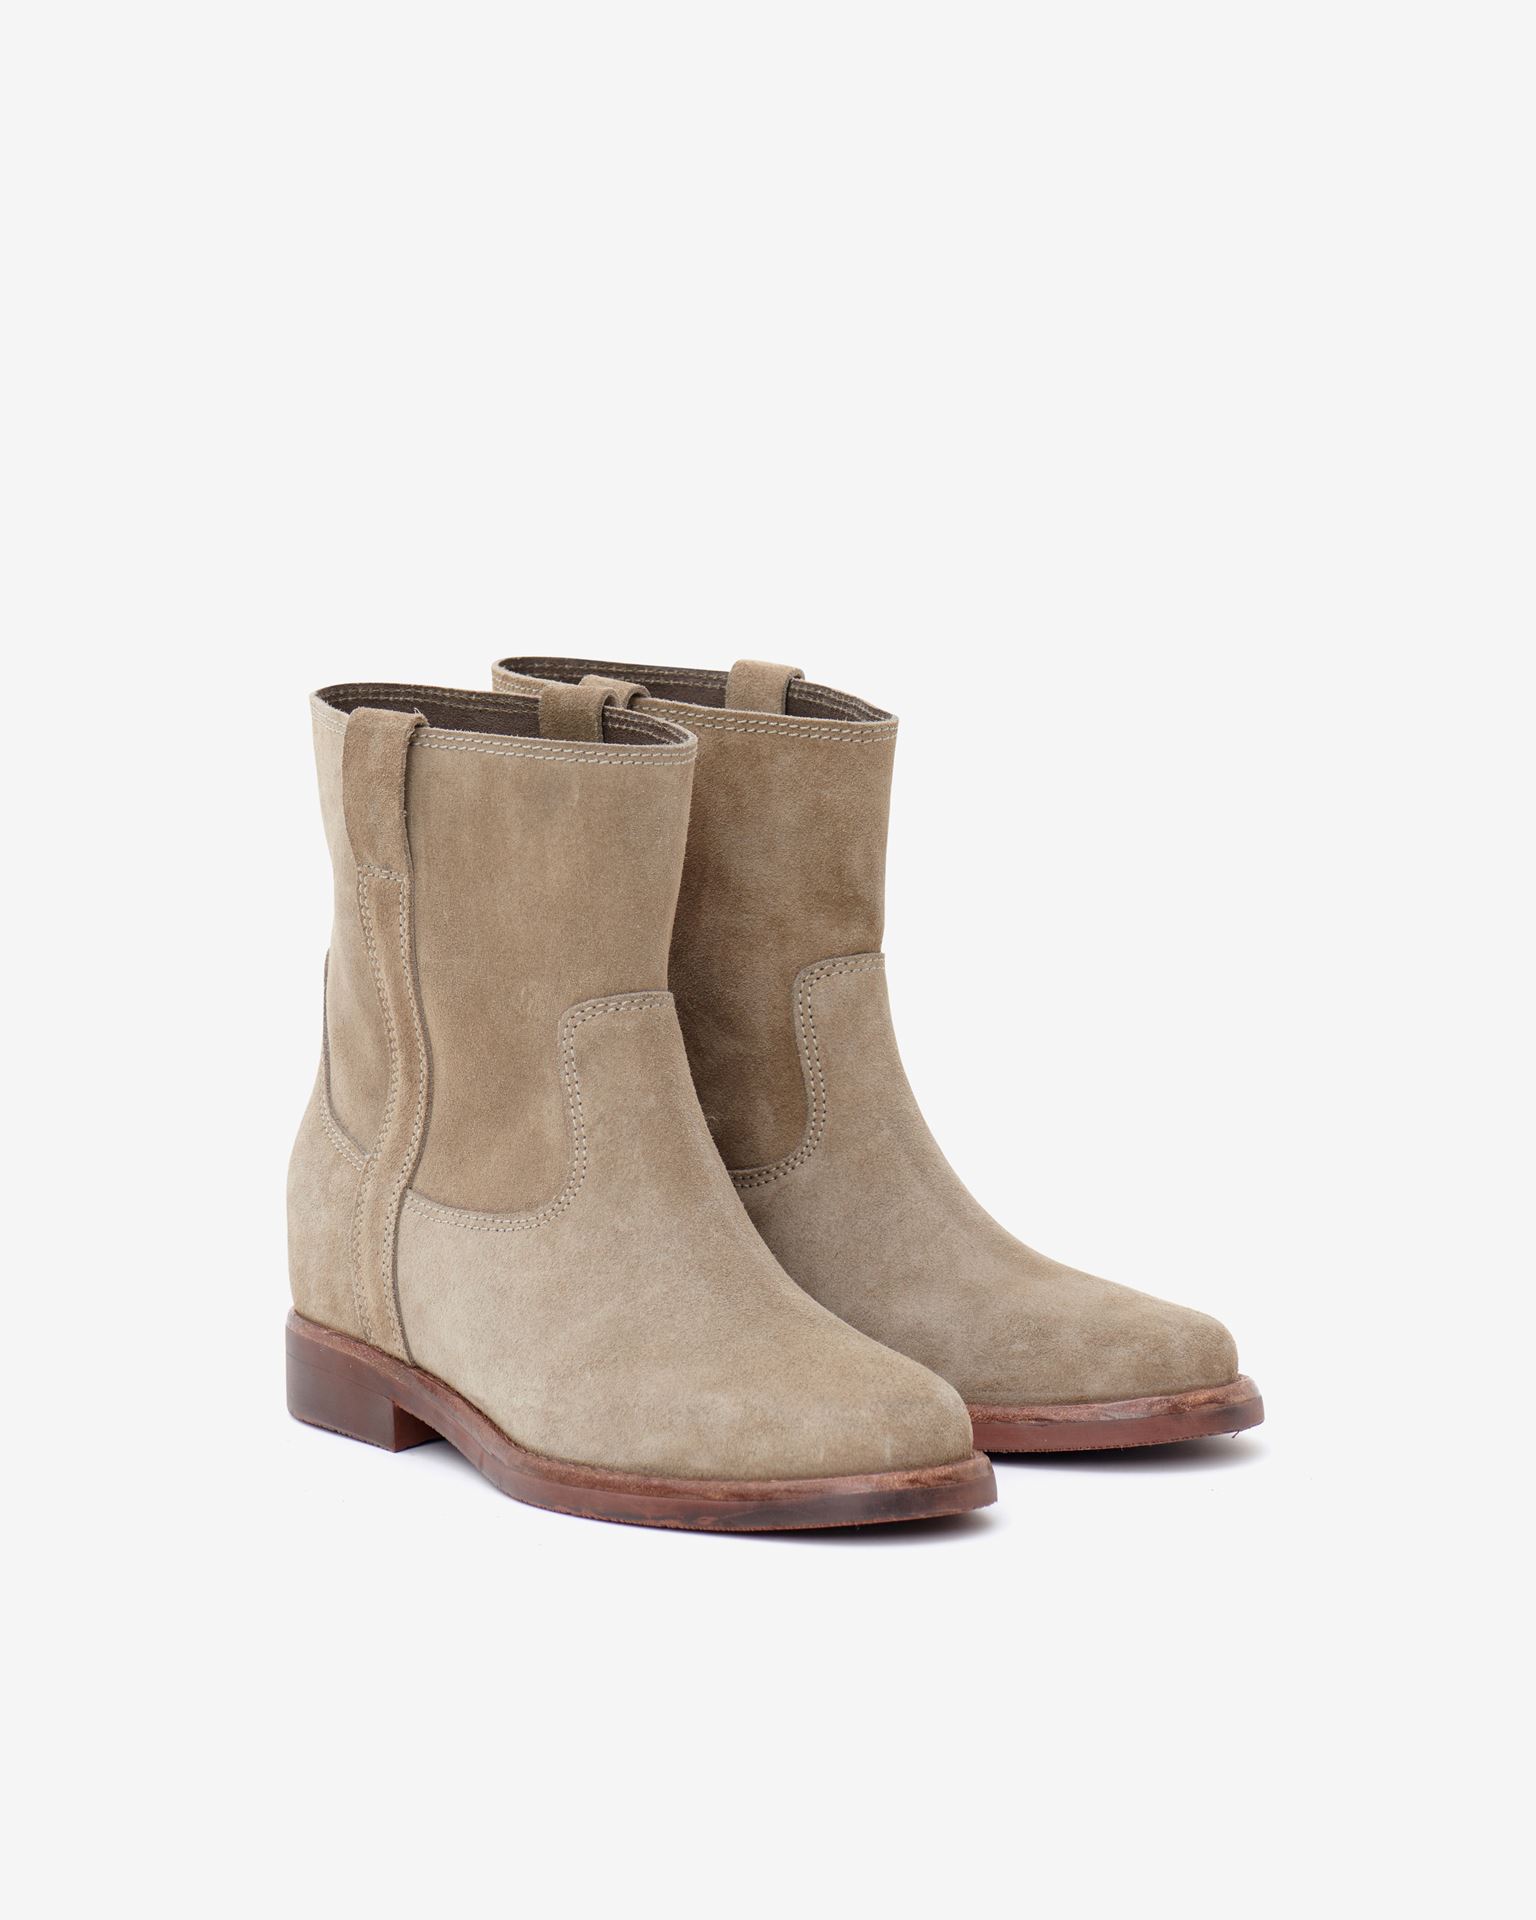 Isabel Marant, Susee Suede Ankle Boots - Women - Brown